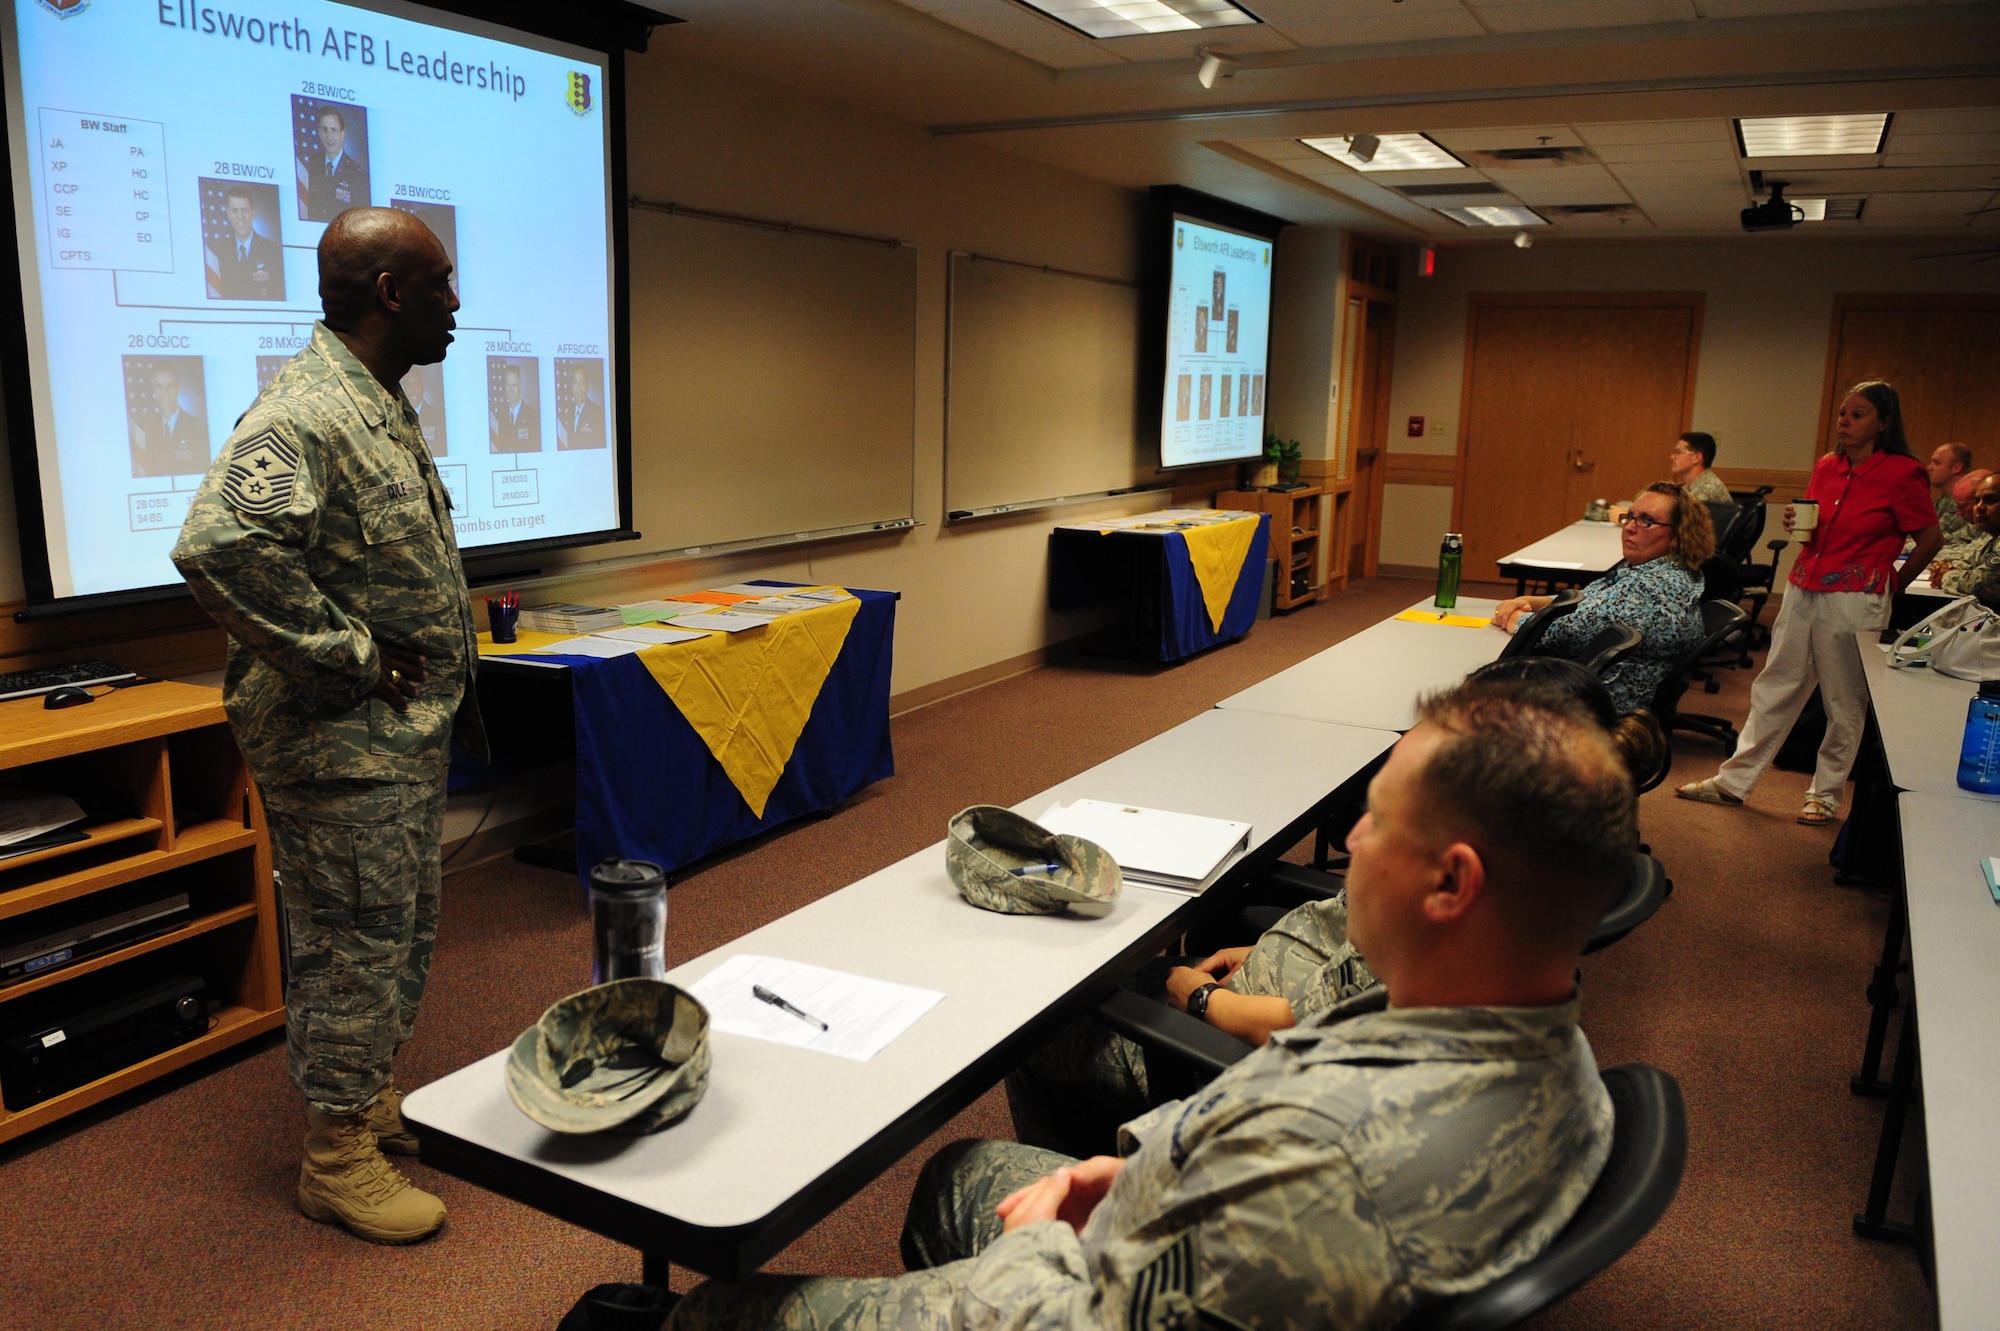 ELLSWORTH AIR FORCE BASE, S.D. – Chief Master Sgt. Clifton Cole, 28th Bomb Wing command chief, gives a briefing to Right Start, Aug. 17. Right Start is an orientation program for Airmen new to the base. (U.S. Air Force photo/Senior Airman Corey Hook)